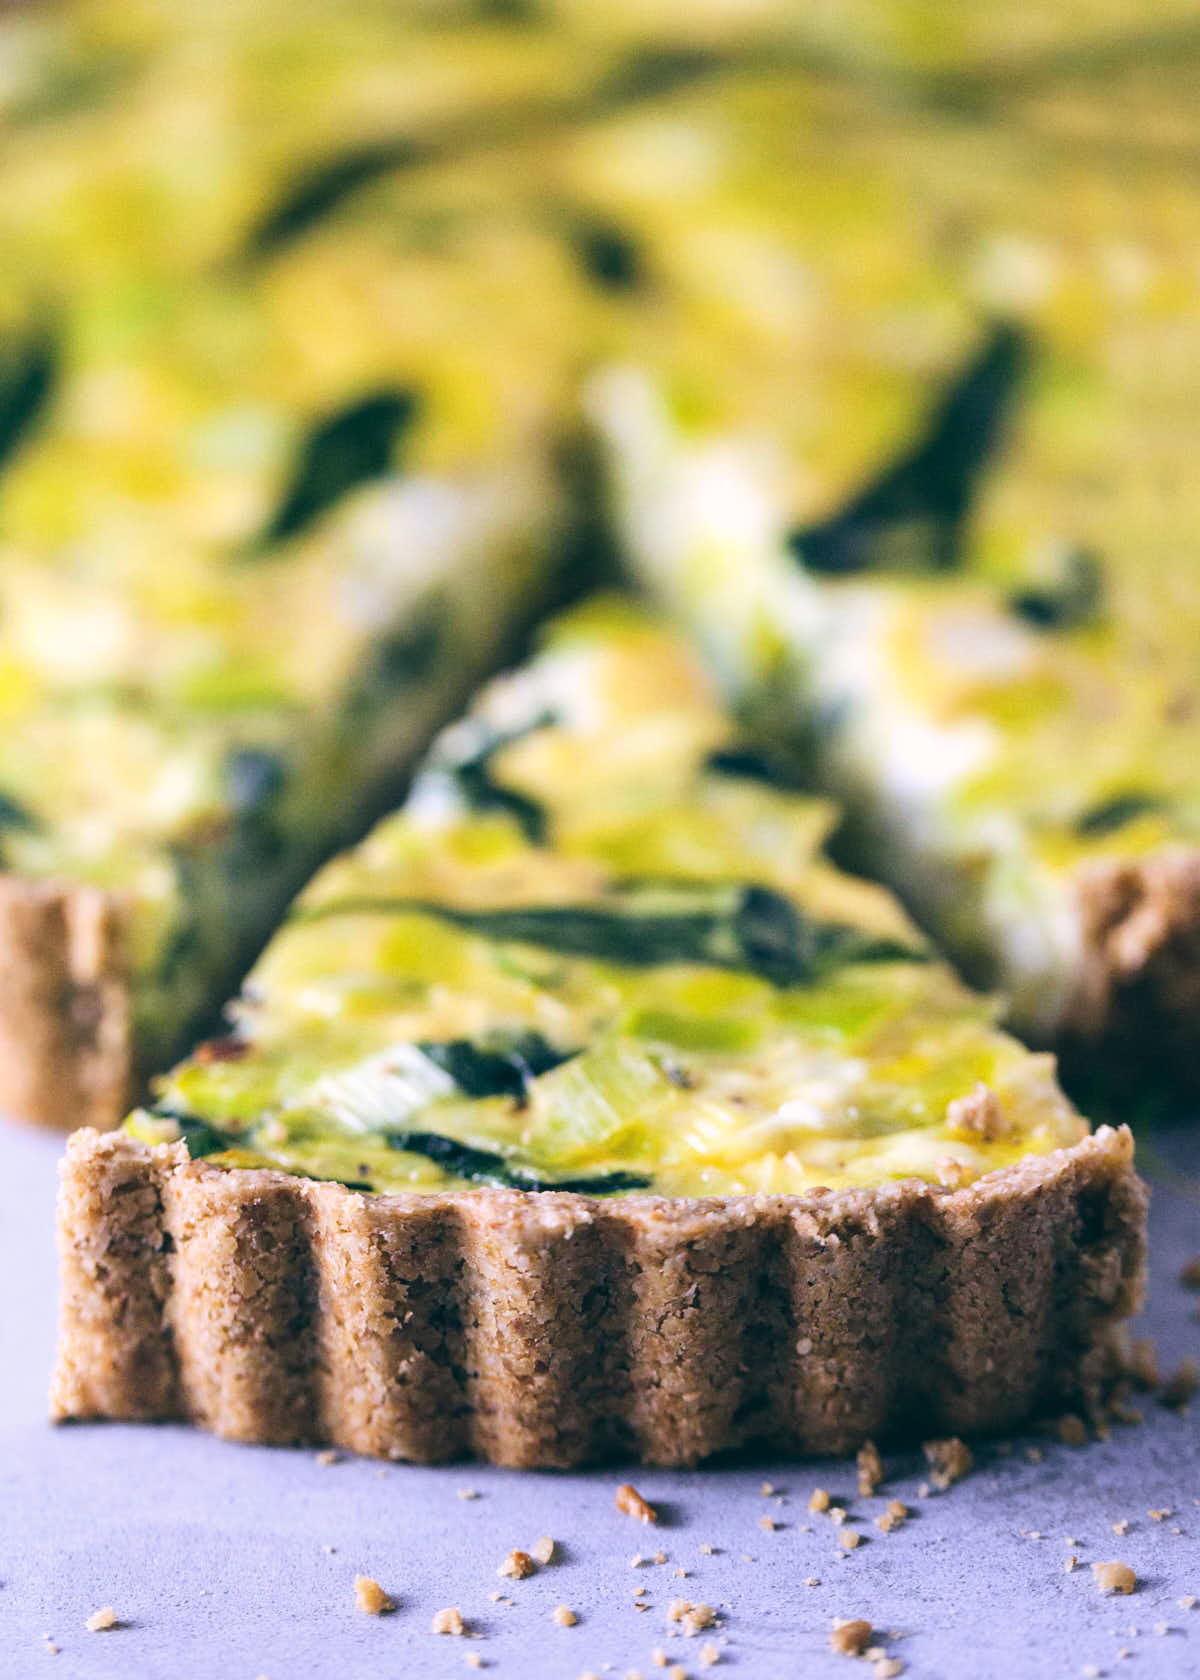 Slice of quiche on a stone surface